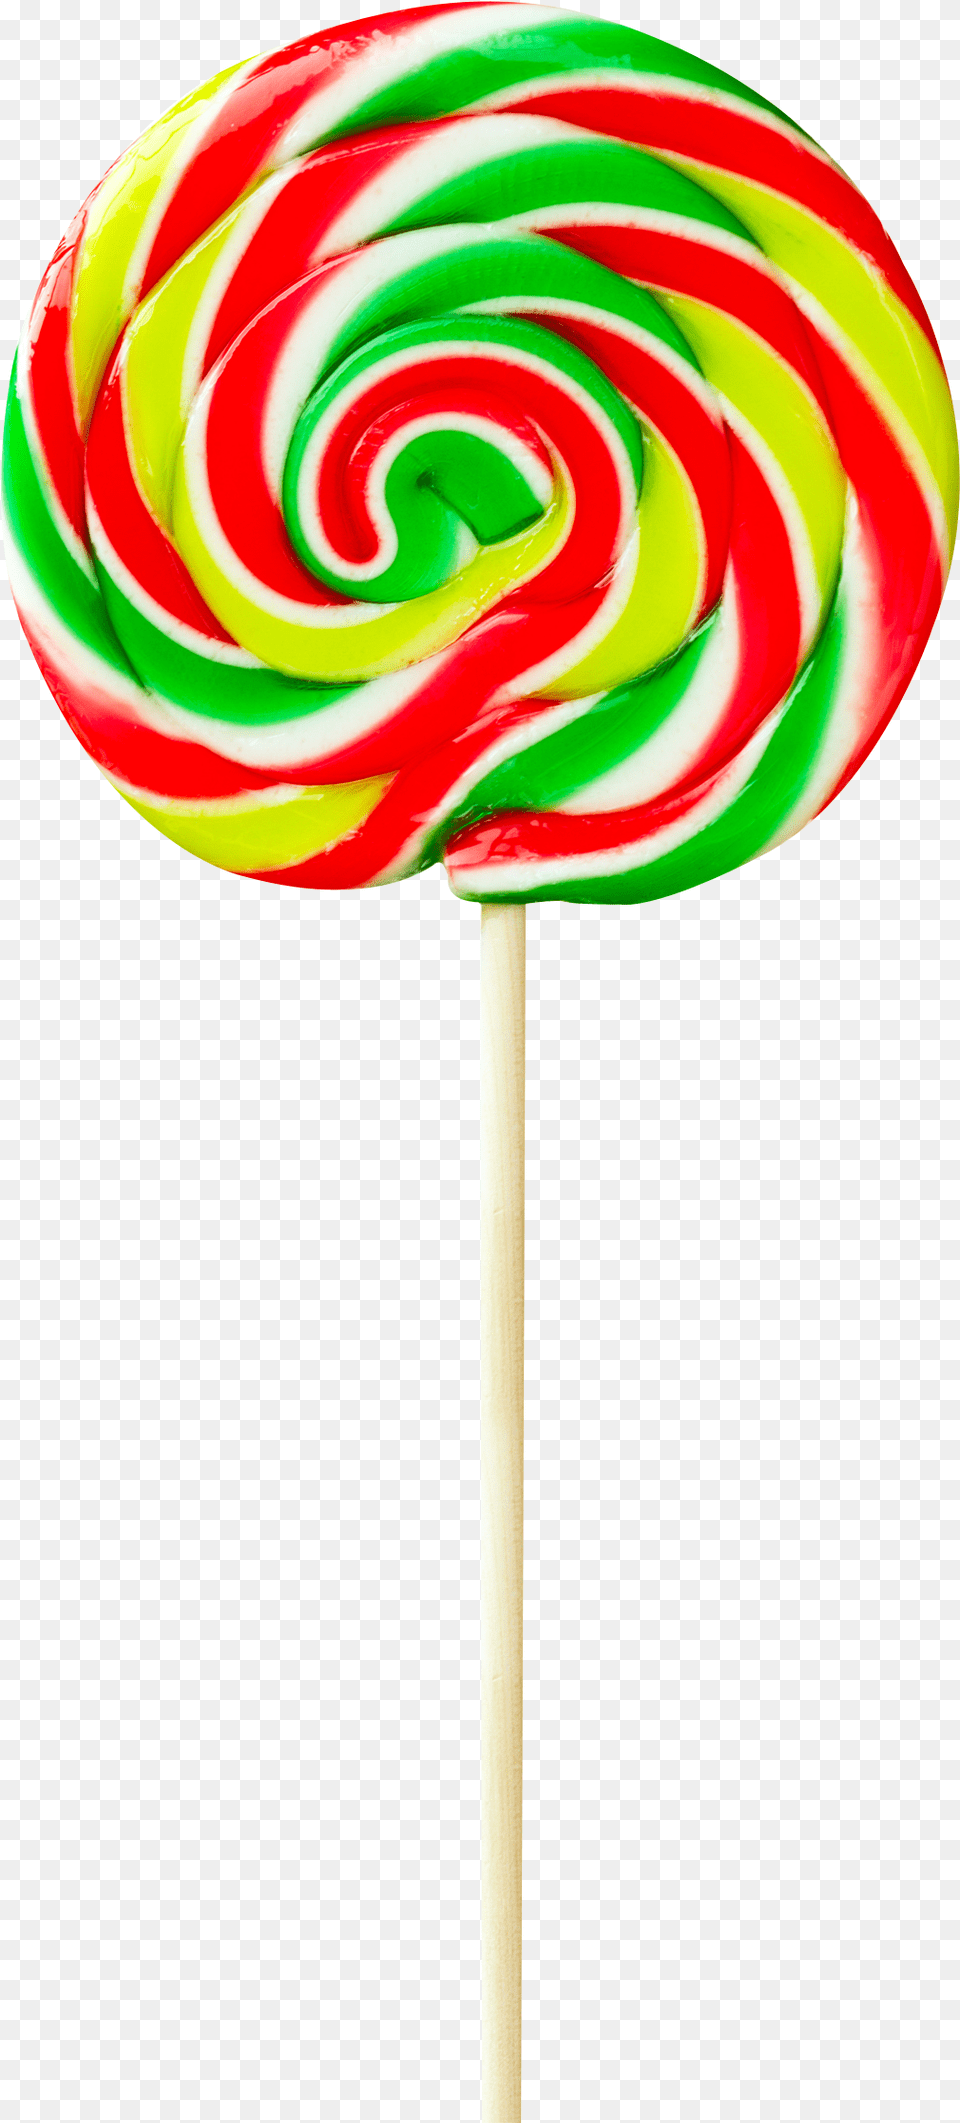 Lollipop, Candy, Food, Sweets Png